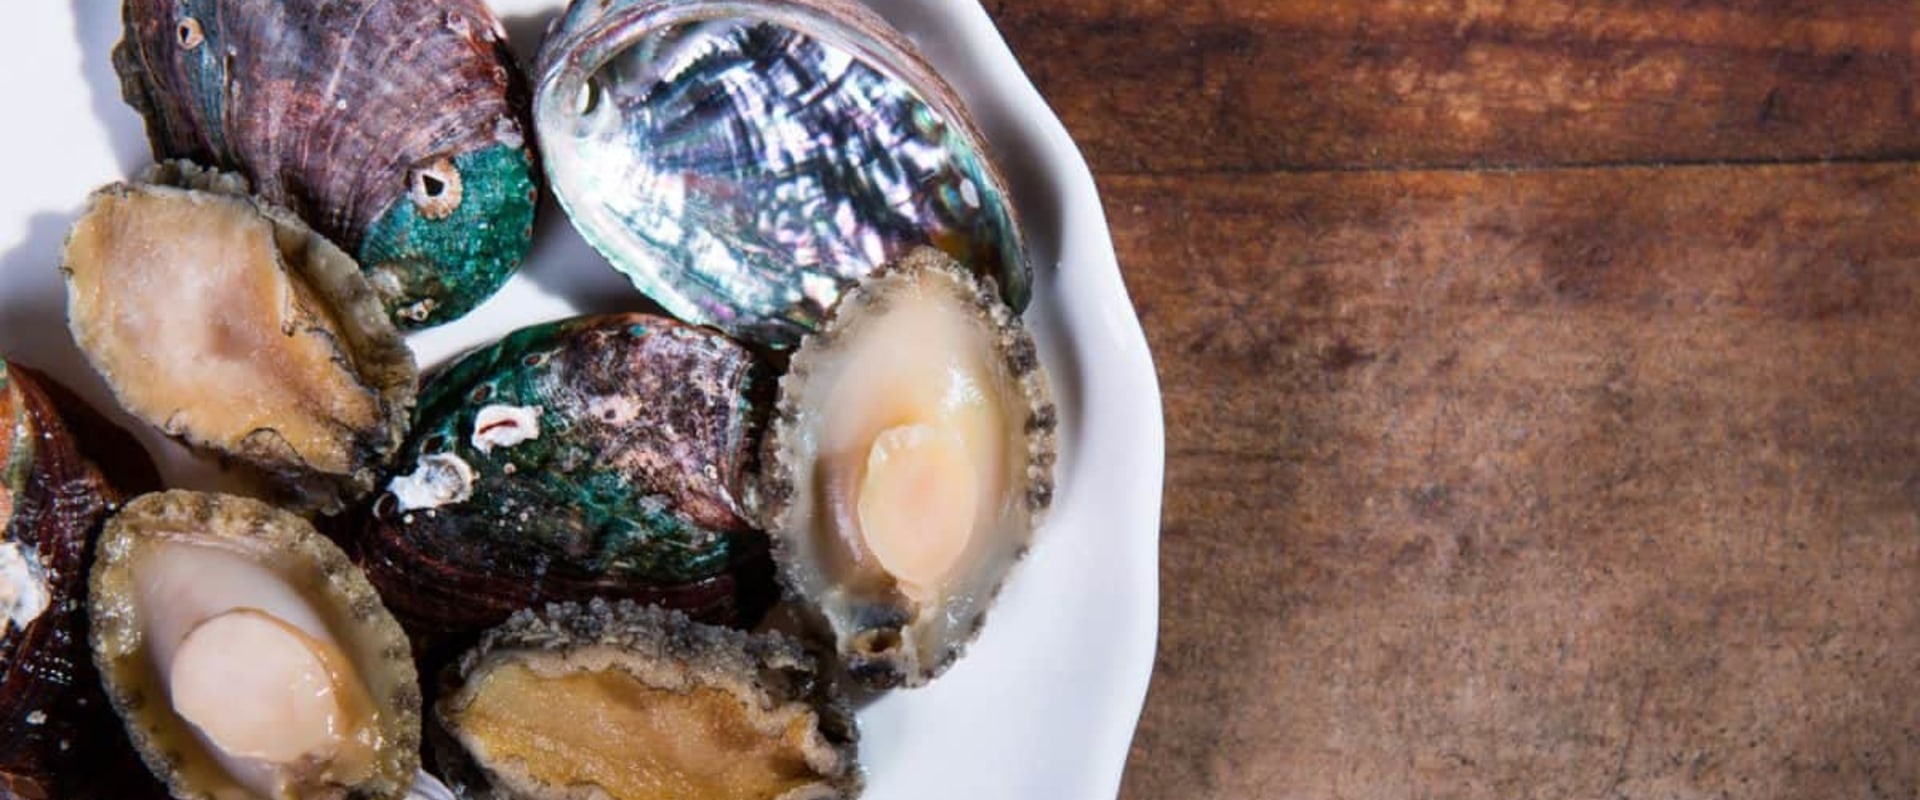 Is Canned Abalone Safe to Eat?